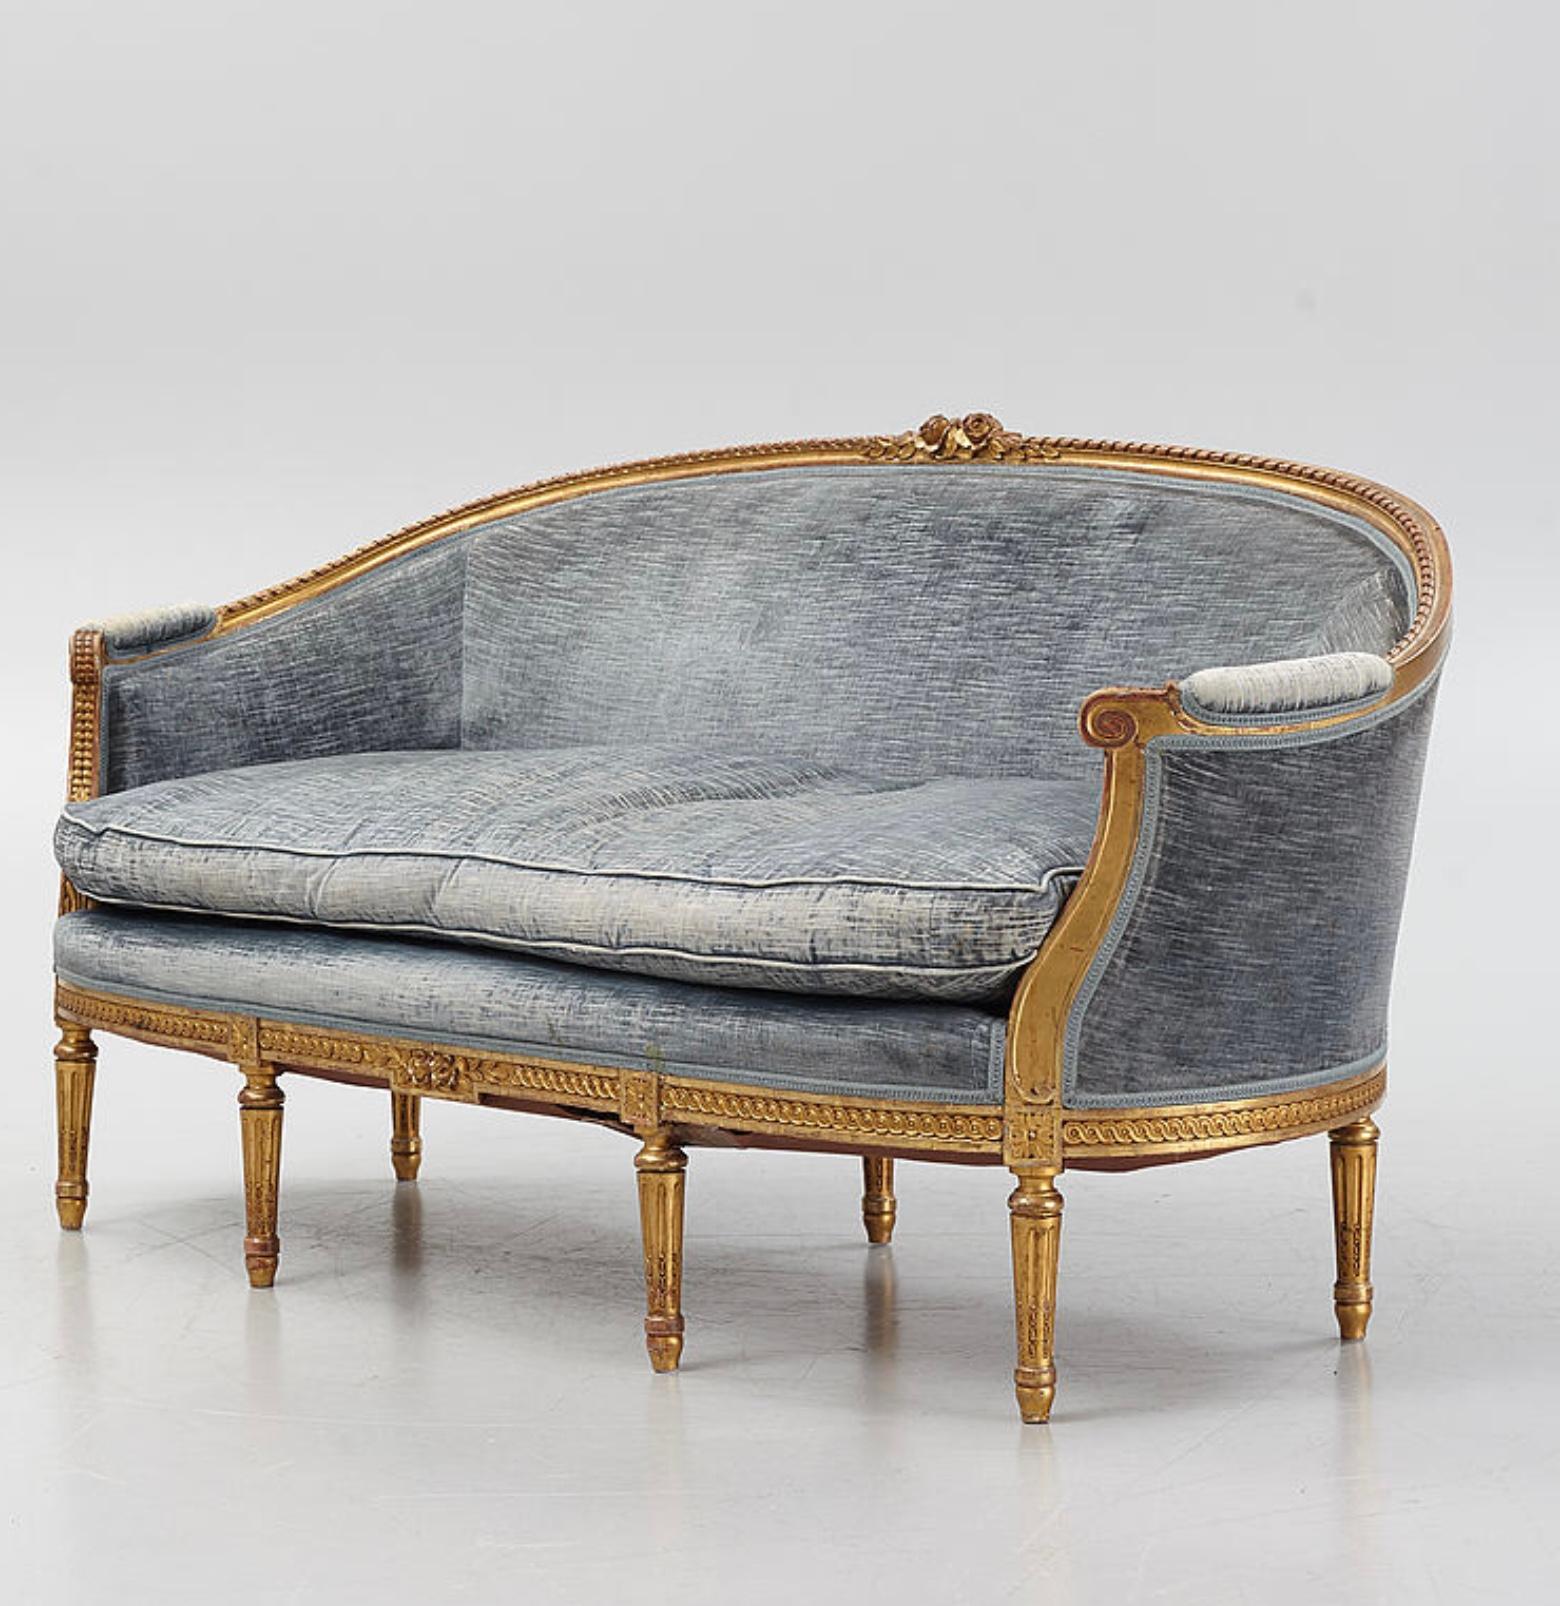 This wonderfully large and comfortable Swedish two-seater gilt sofa dates from the 1900s period and is designed in the Gustavian style.
The sofa features classic scrolling decoration with carved flowers and leaves at the centre and has a slightly